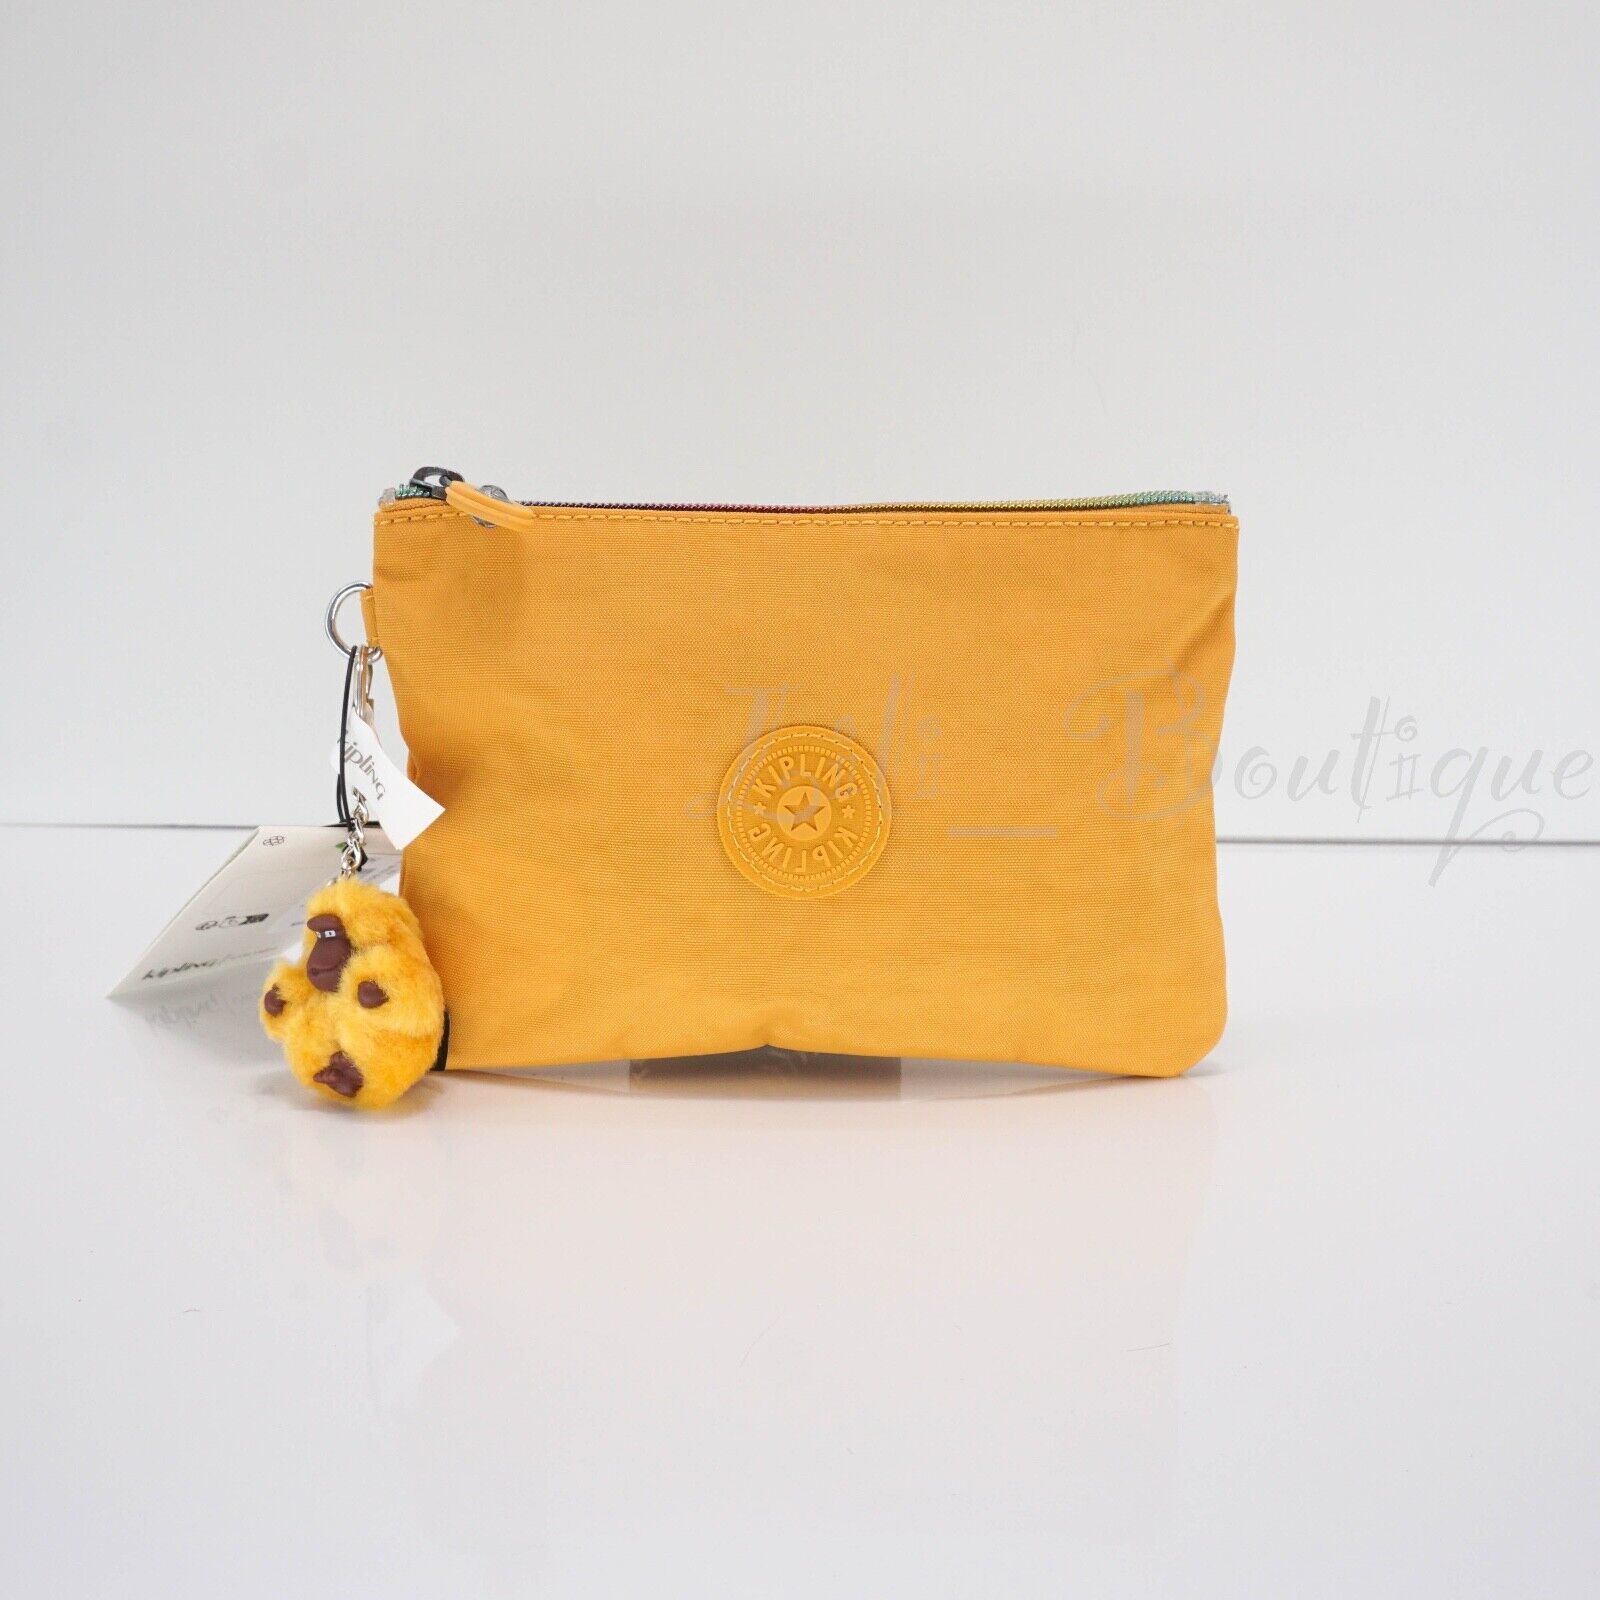 Primary image for NWT Kipling AC8641 VIV Cosmetic Accessory Pouch Zipper Polyamide Spicy Gold $34